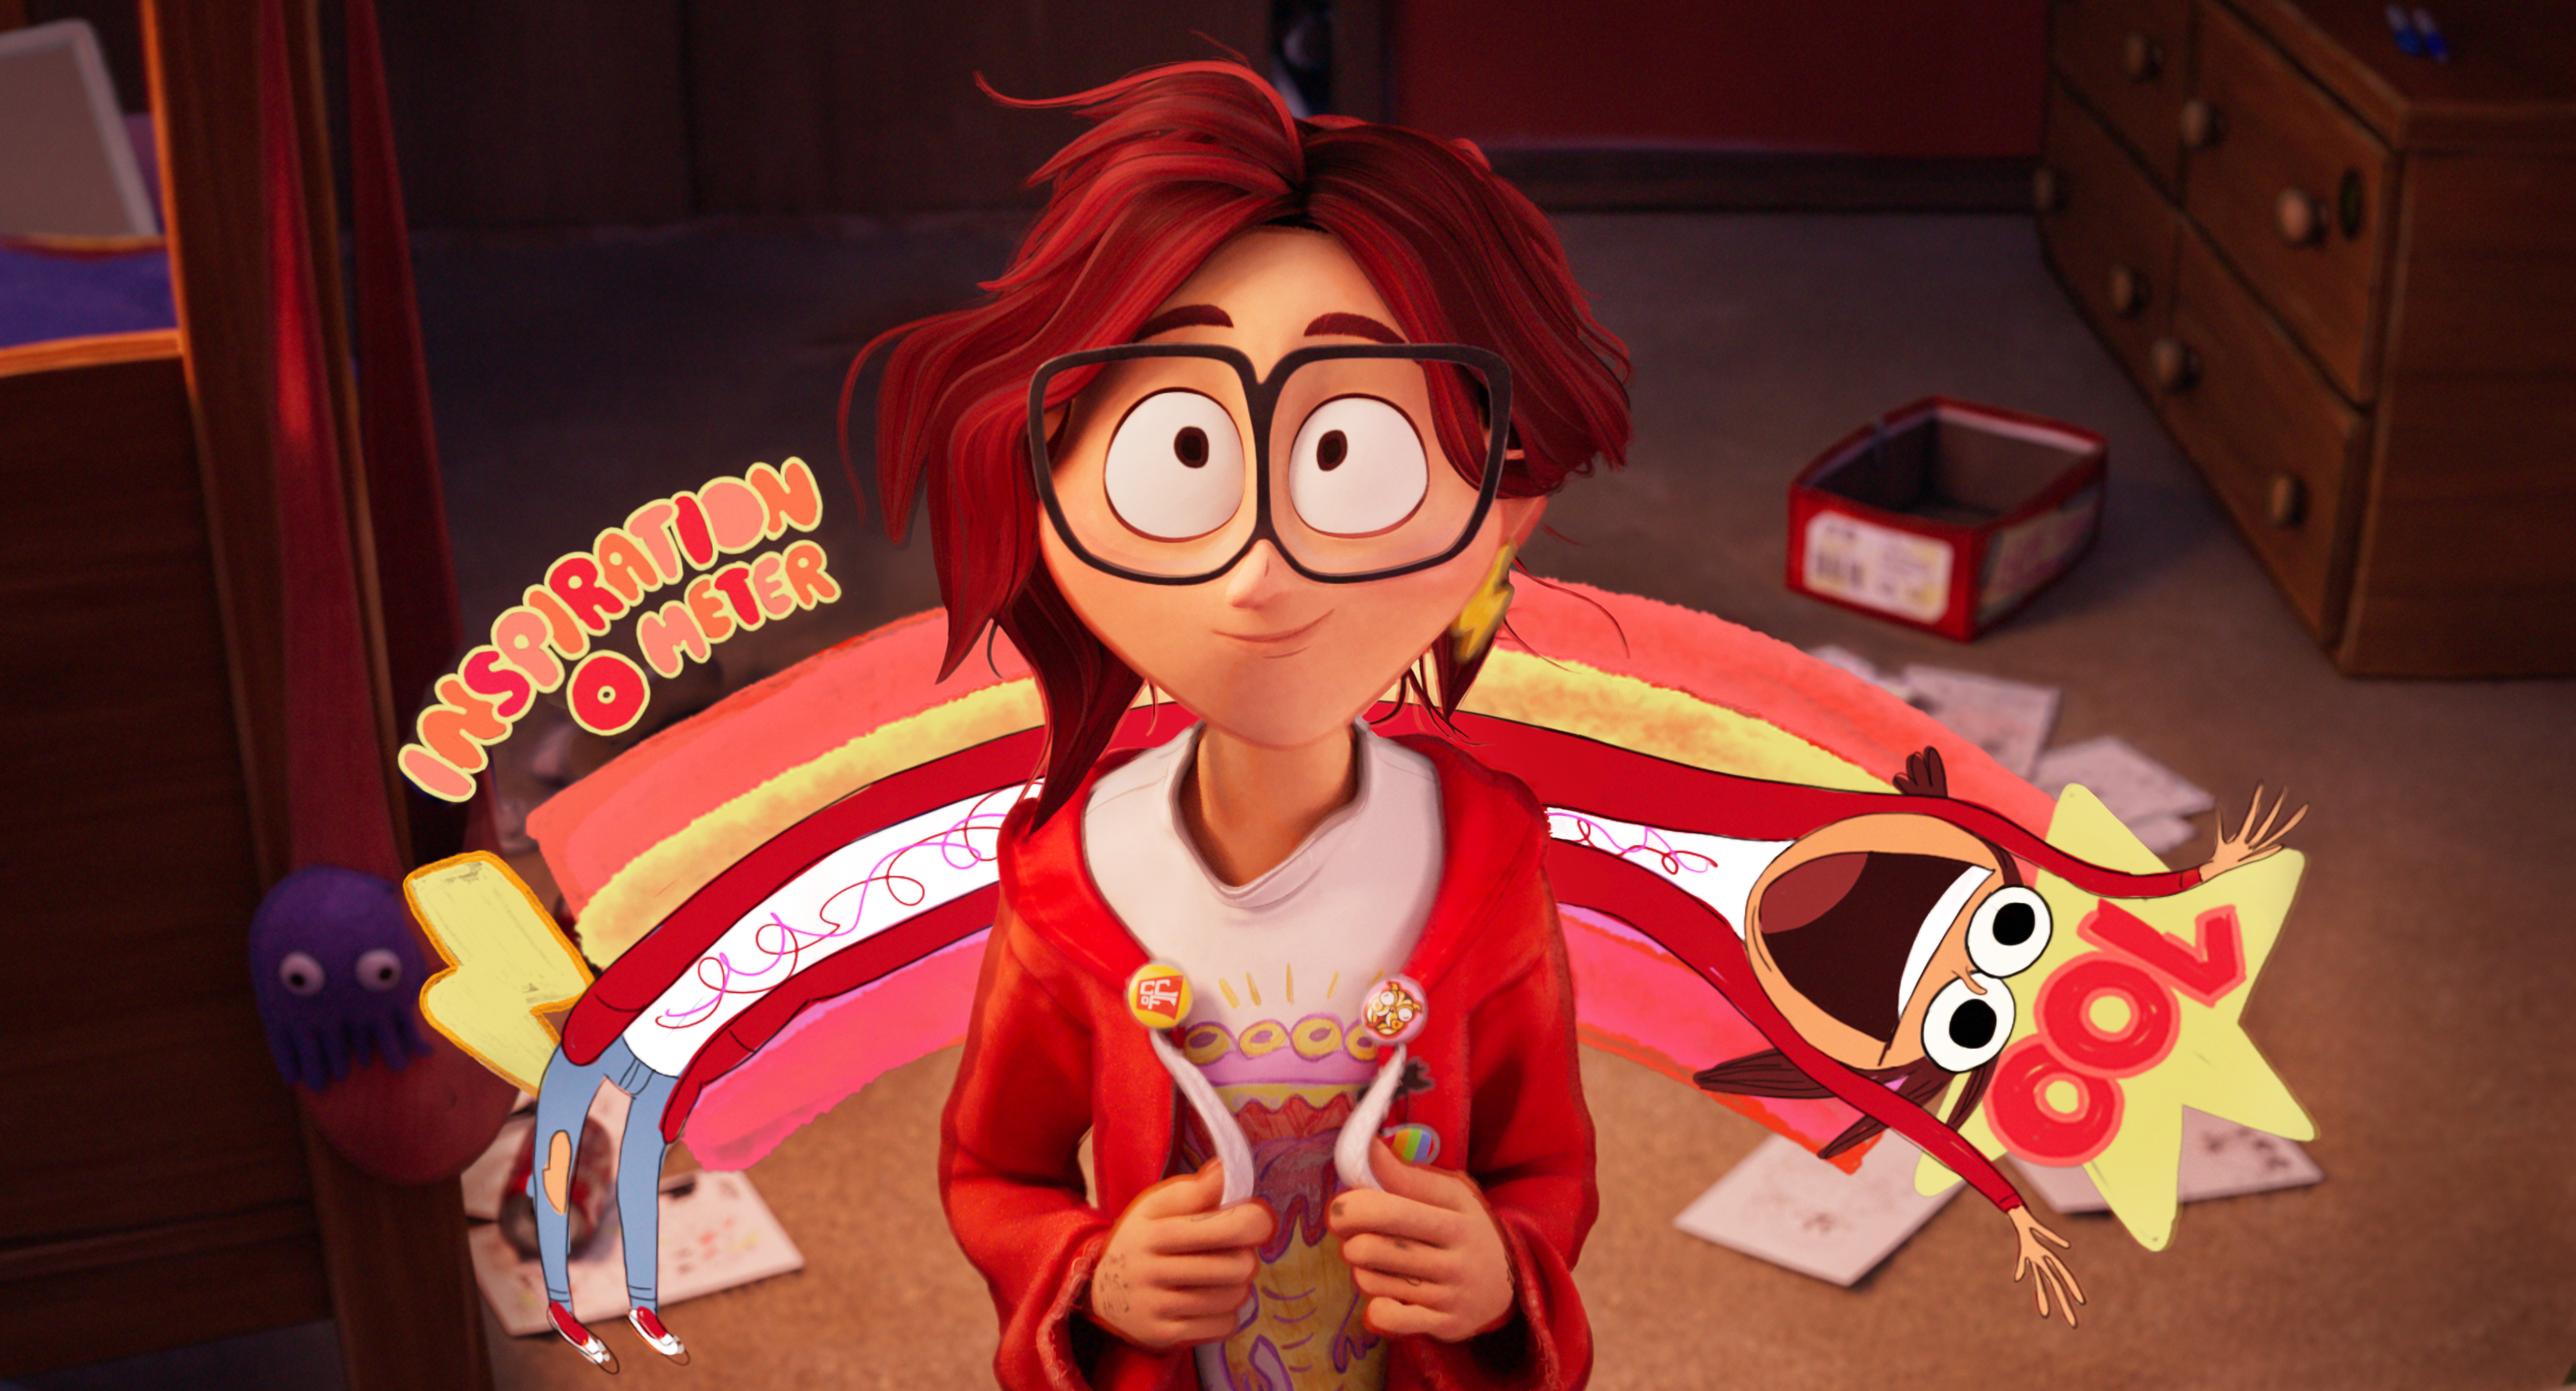 katie mitchell, a teenage girl with glasses and a red hoodie, looks up at the camera, doodles behind her